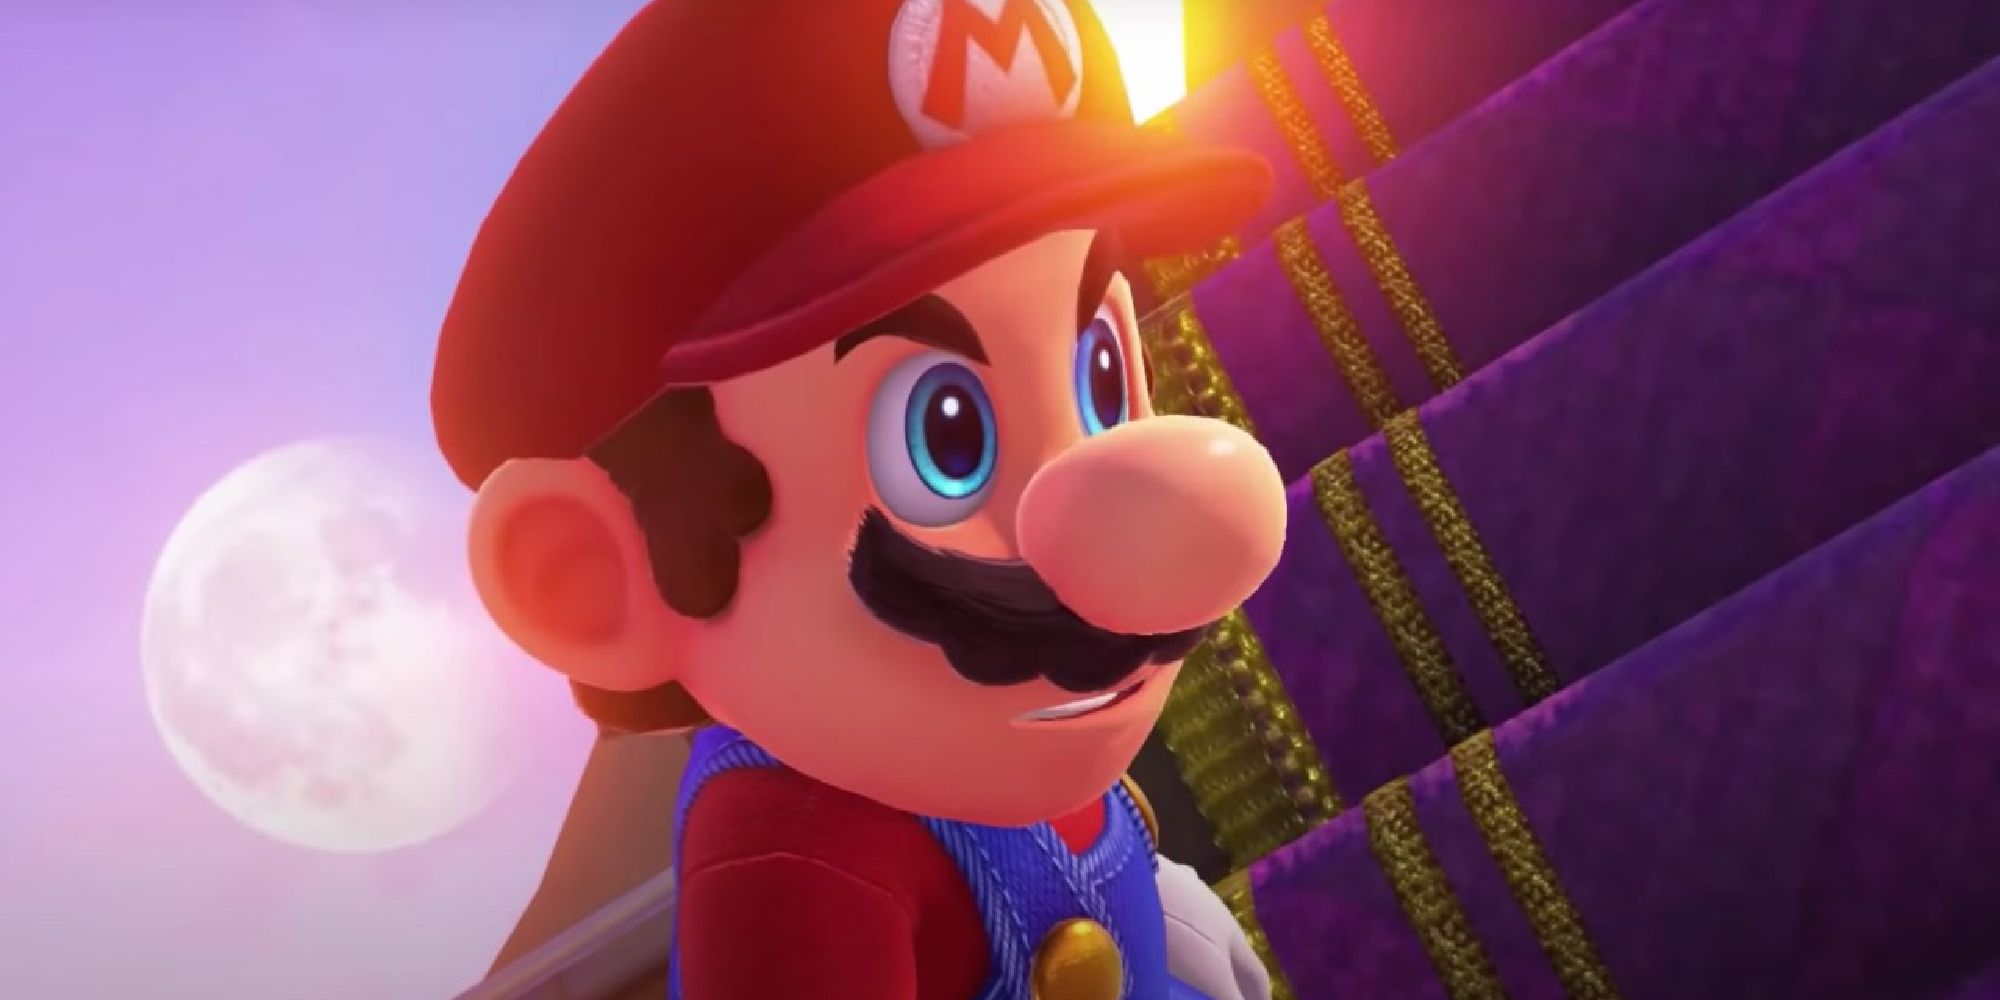 Mario standing on Bowser's airship in Super Mario Odyssey